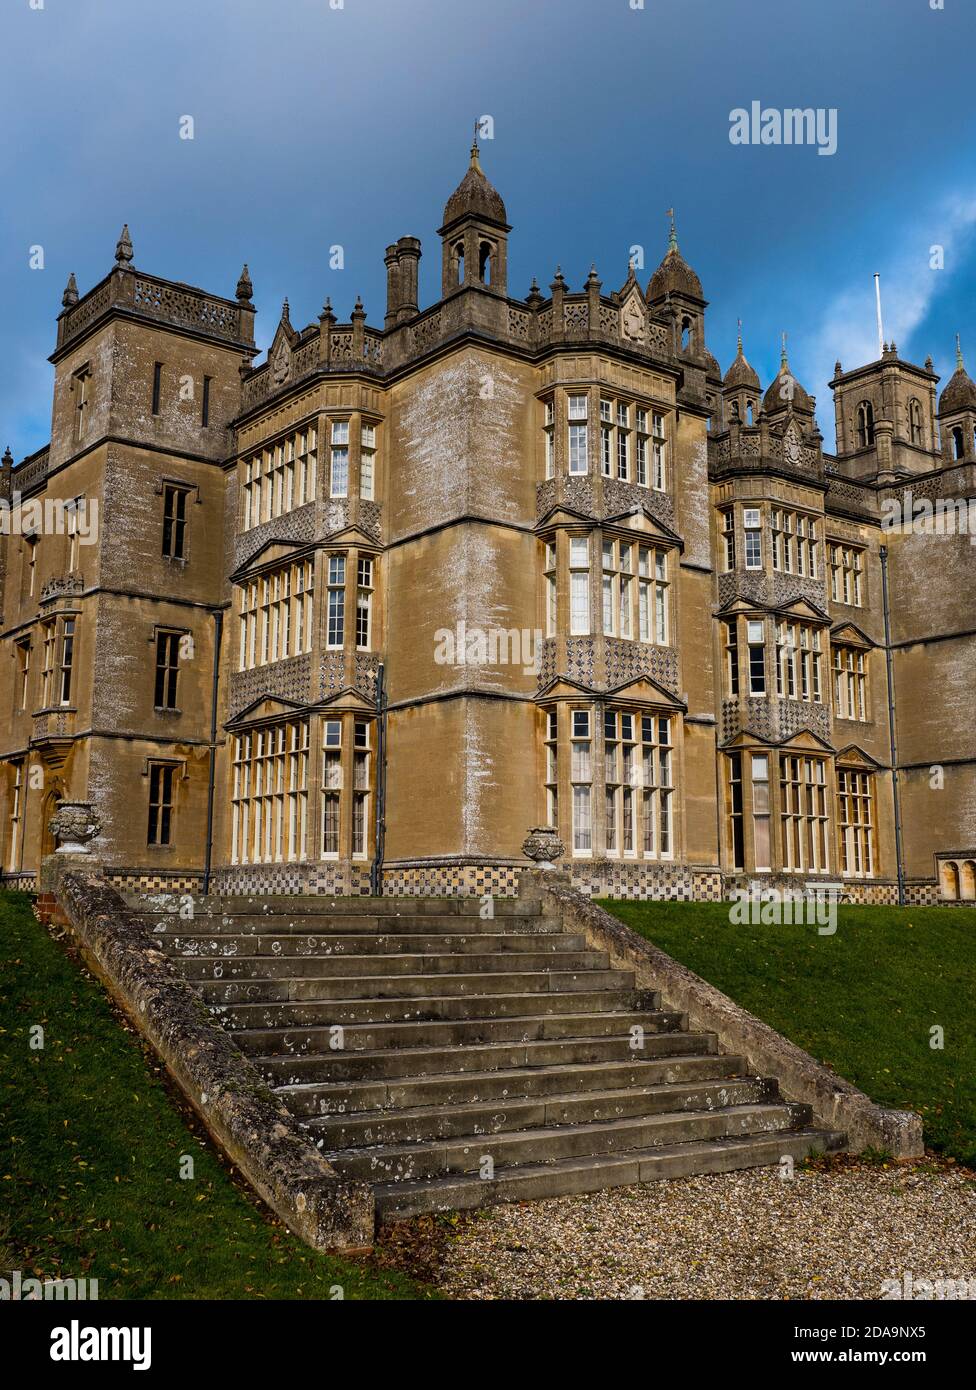 Dramatic Brooding Country House, Englefield House, Englefield Estate, Thale, Reading, Berkshire, England, UK, GB. Stock Photo